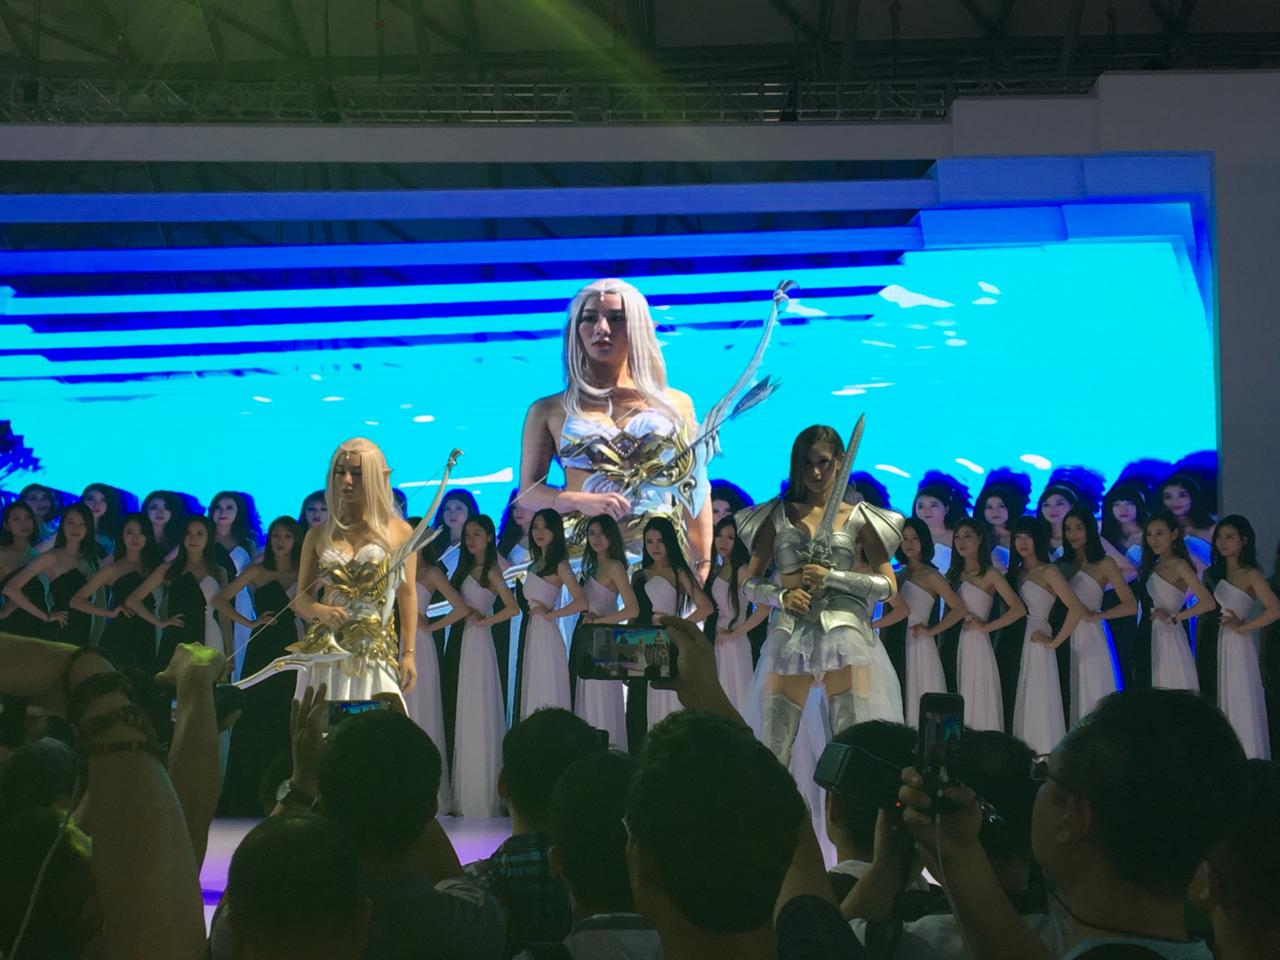 Go Inside The Massive Chinese Gaming Show